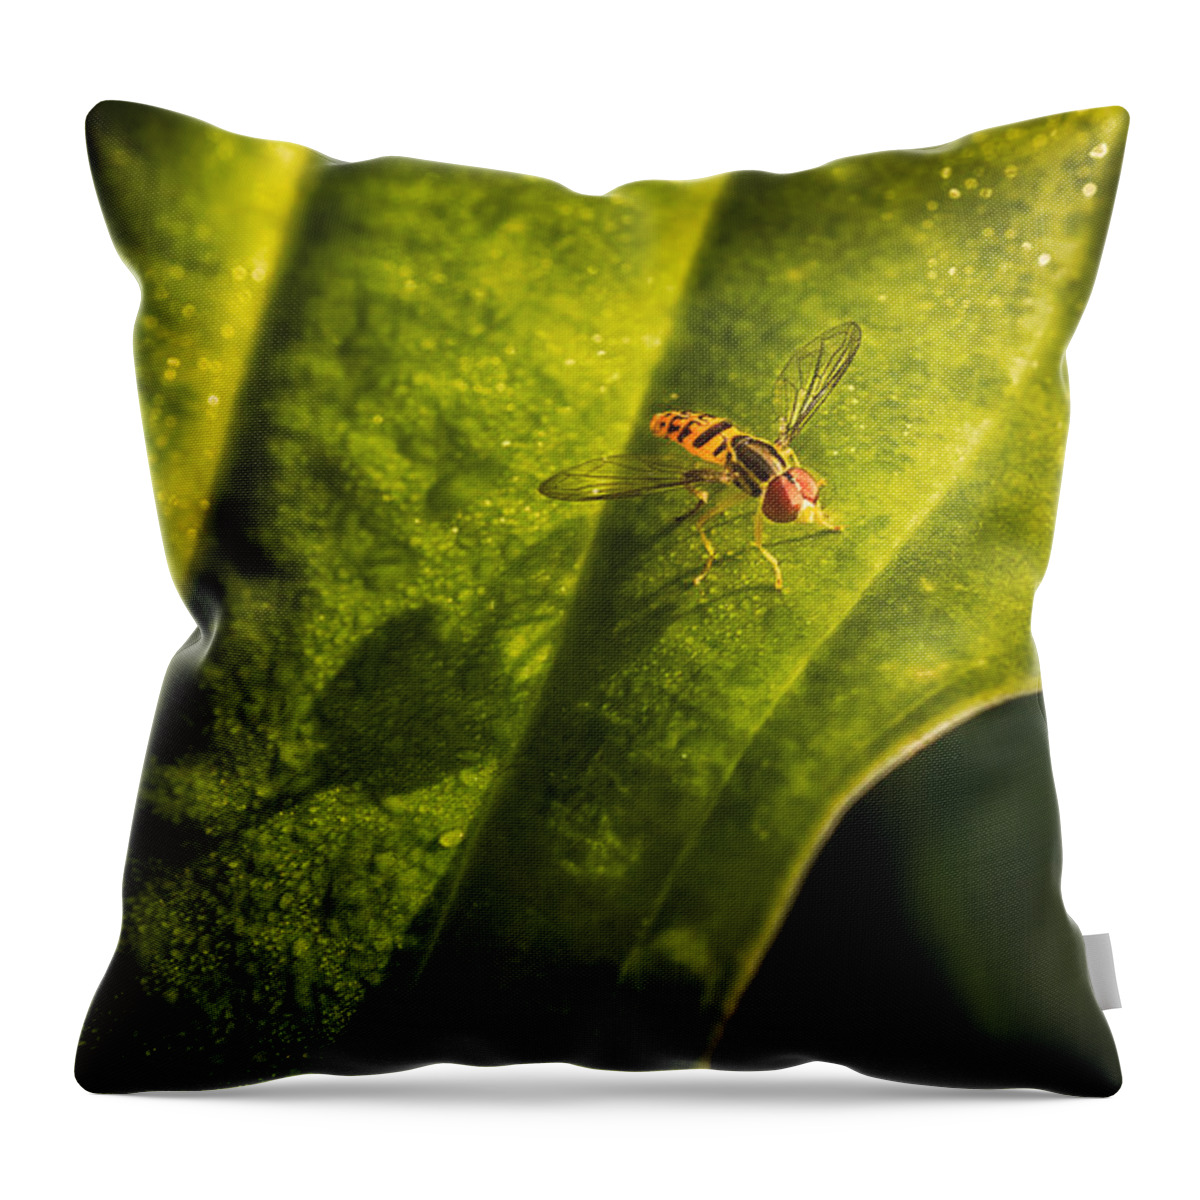 Animals Throw Pillow featuring the photograph Long Shadow by Rikk Flohr